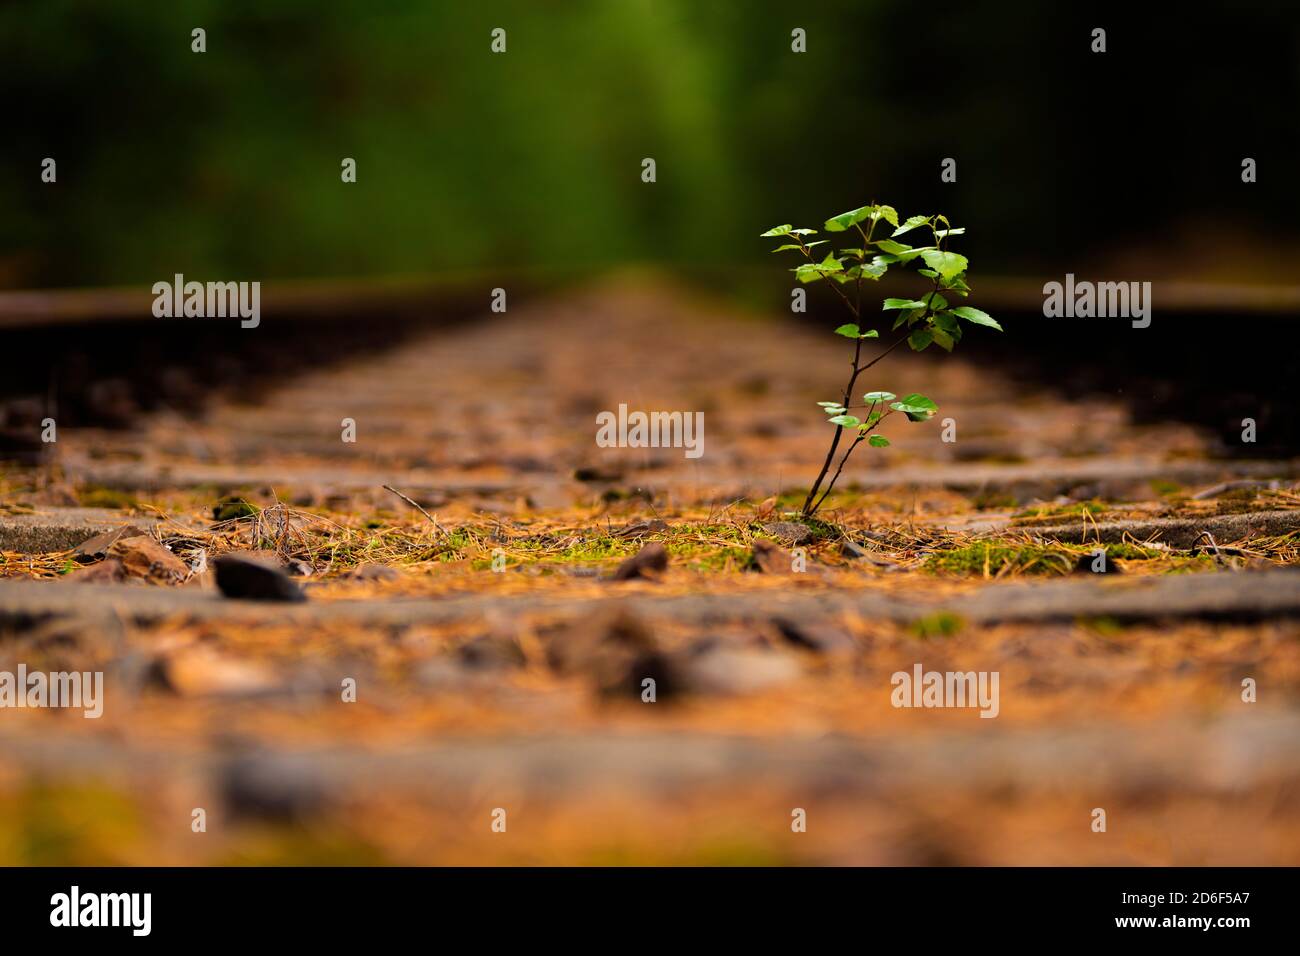 Young deciduous tree in the middle of an old disused track bed Stock Photo